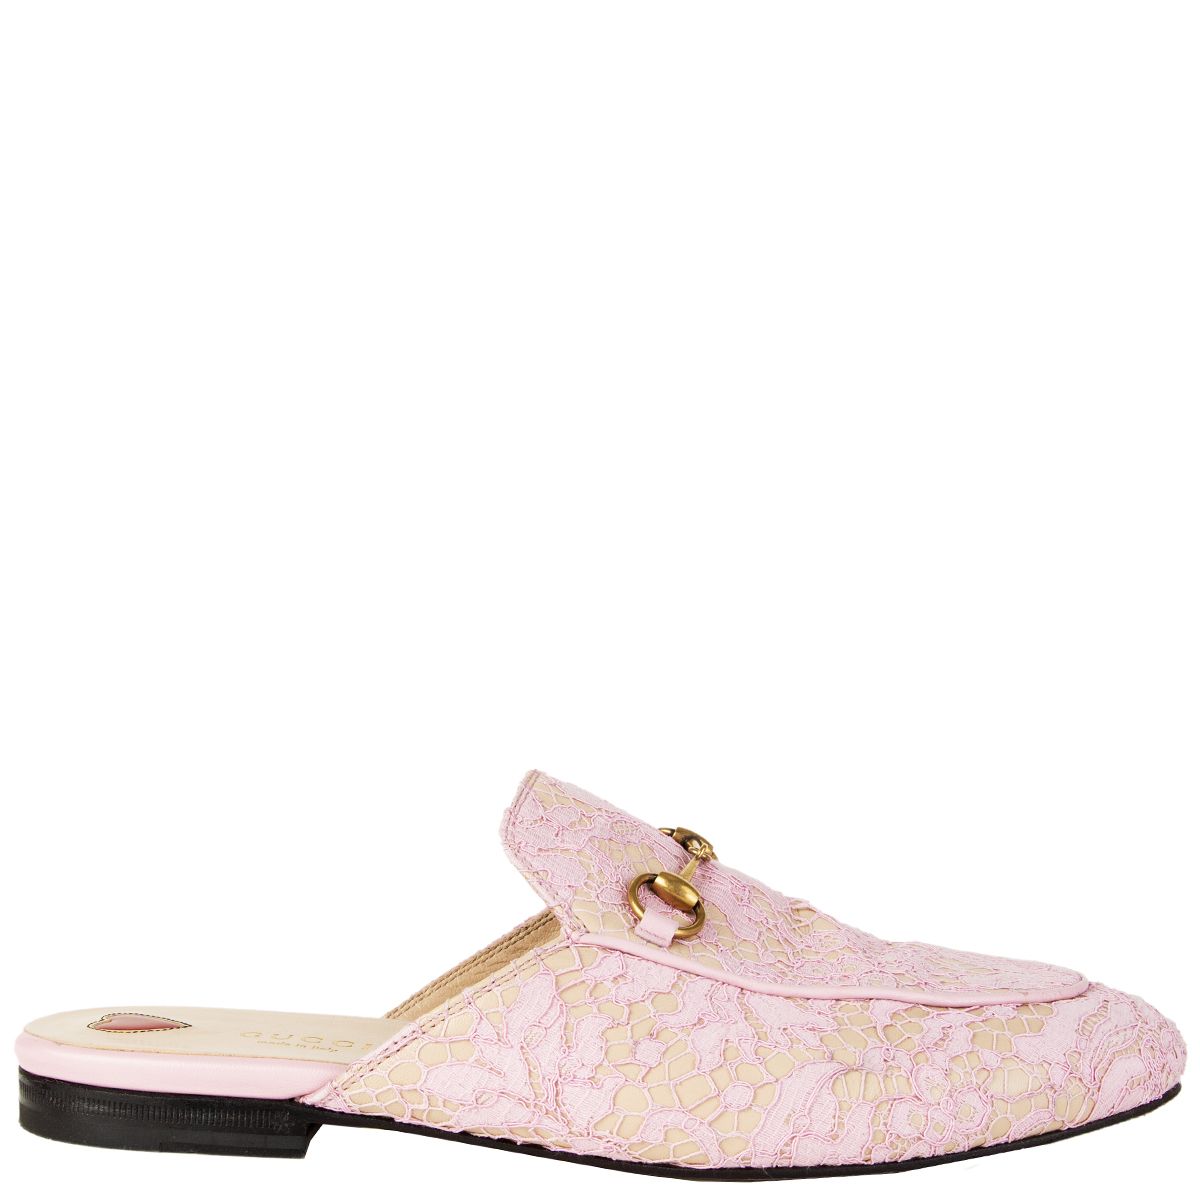 'Princetown' Slipper Mules Loafers Pink Leather